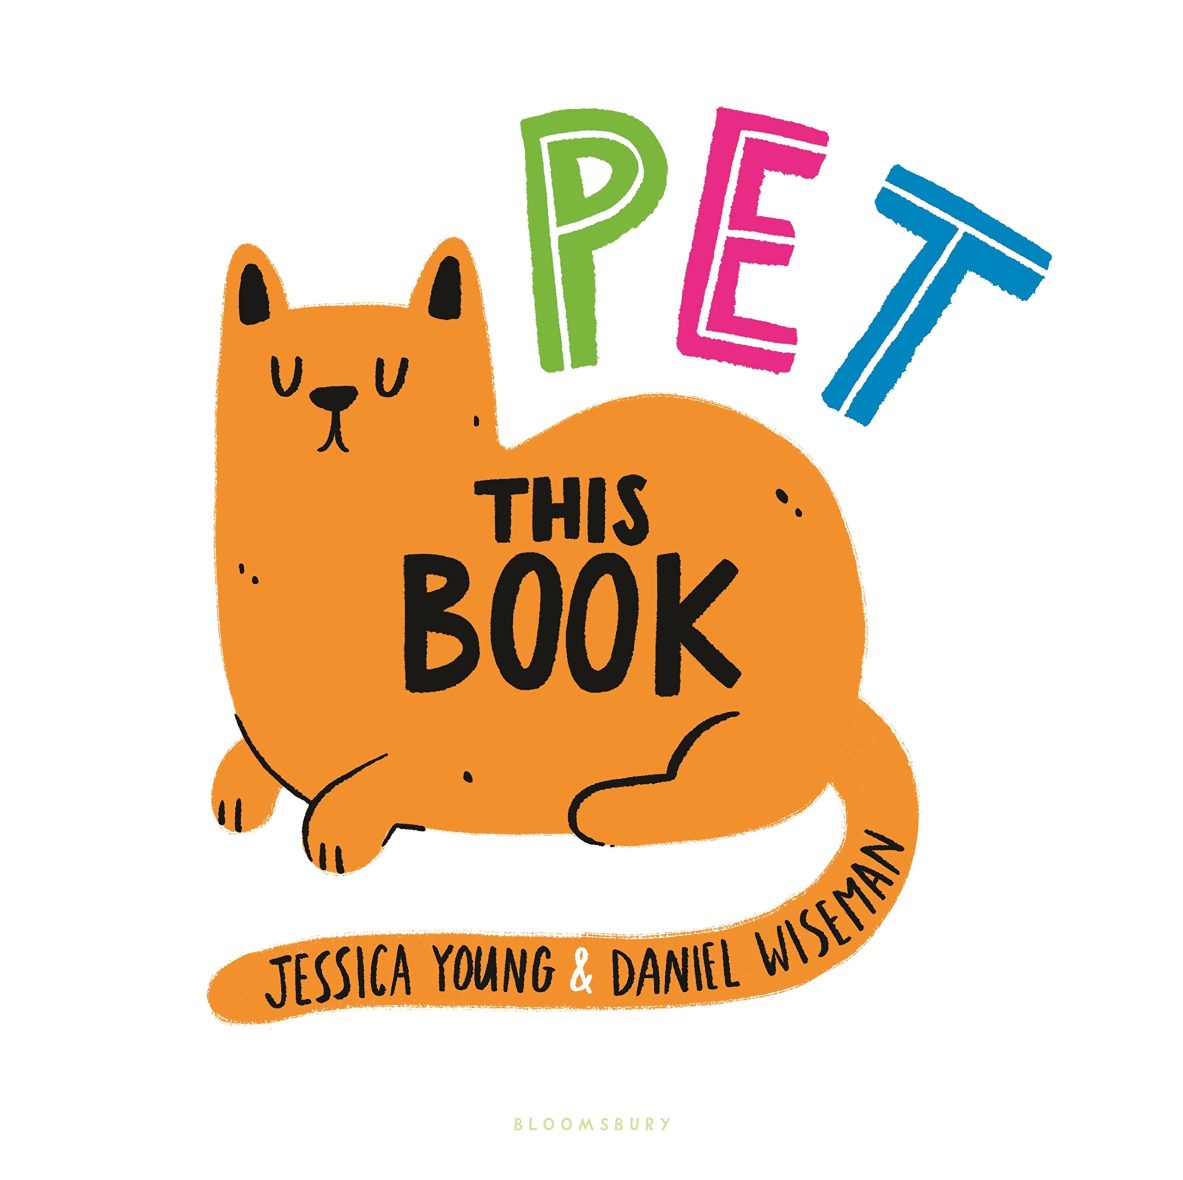 Pet This Book (Hard cover) Picture Book